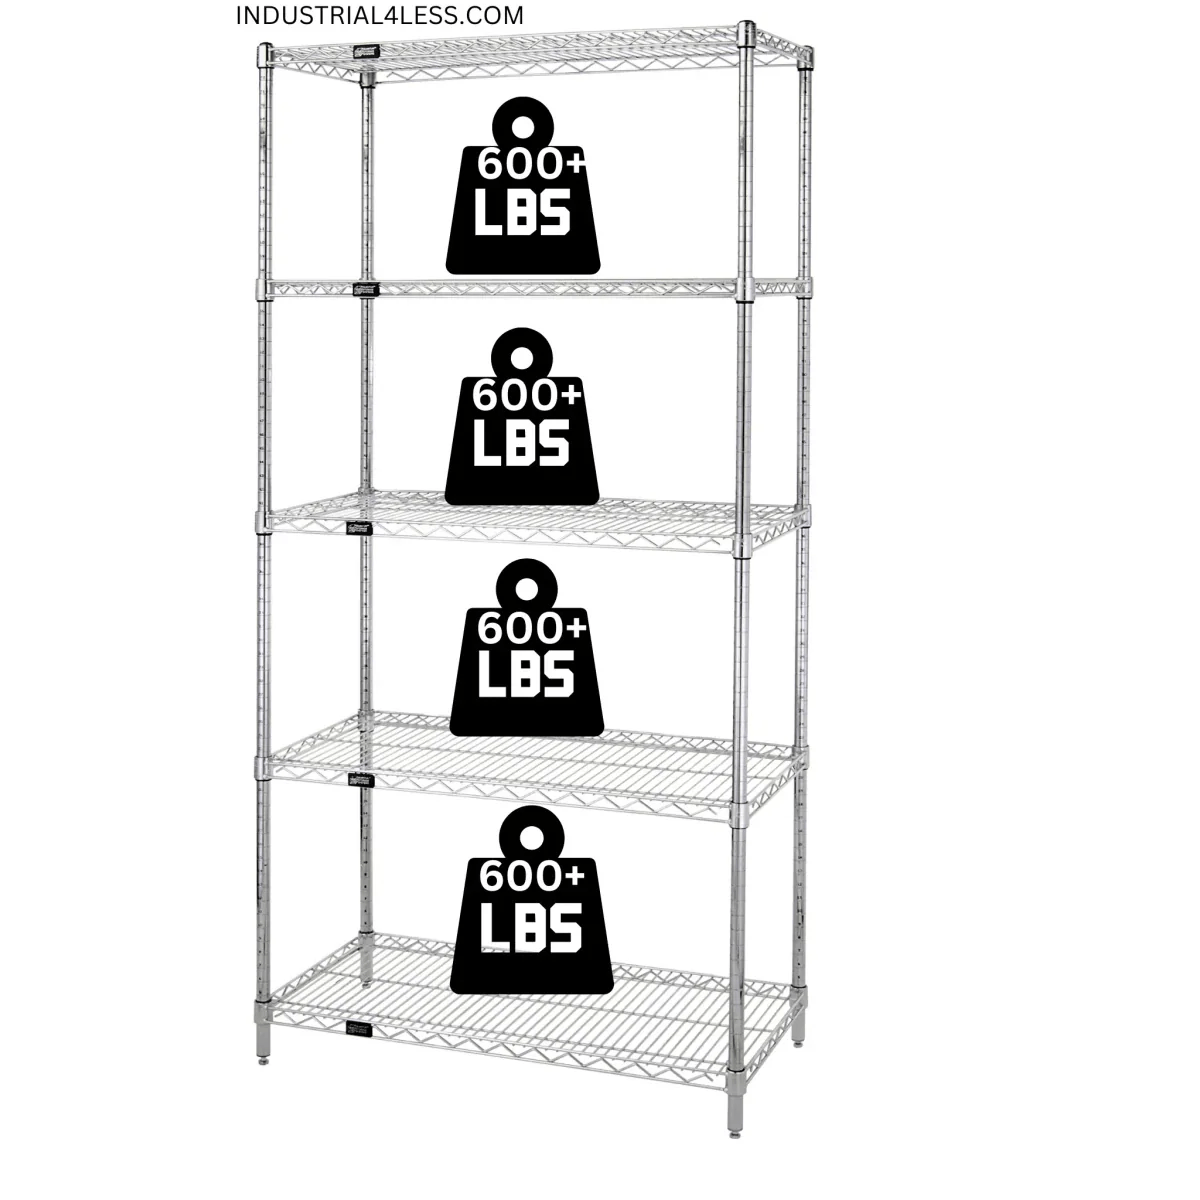 21" x 36" Stainless Steel Wire Shelving Unit - Industrial 4 Less - 21365S-5